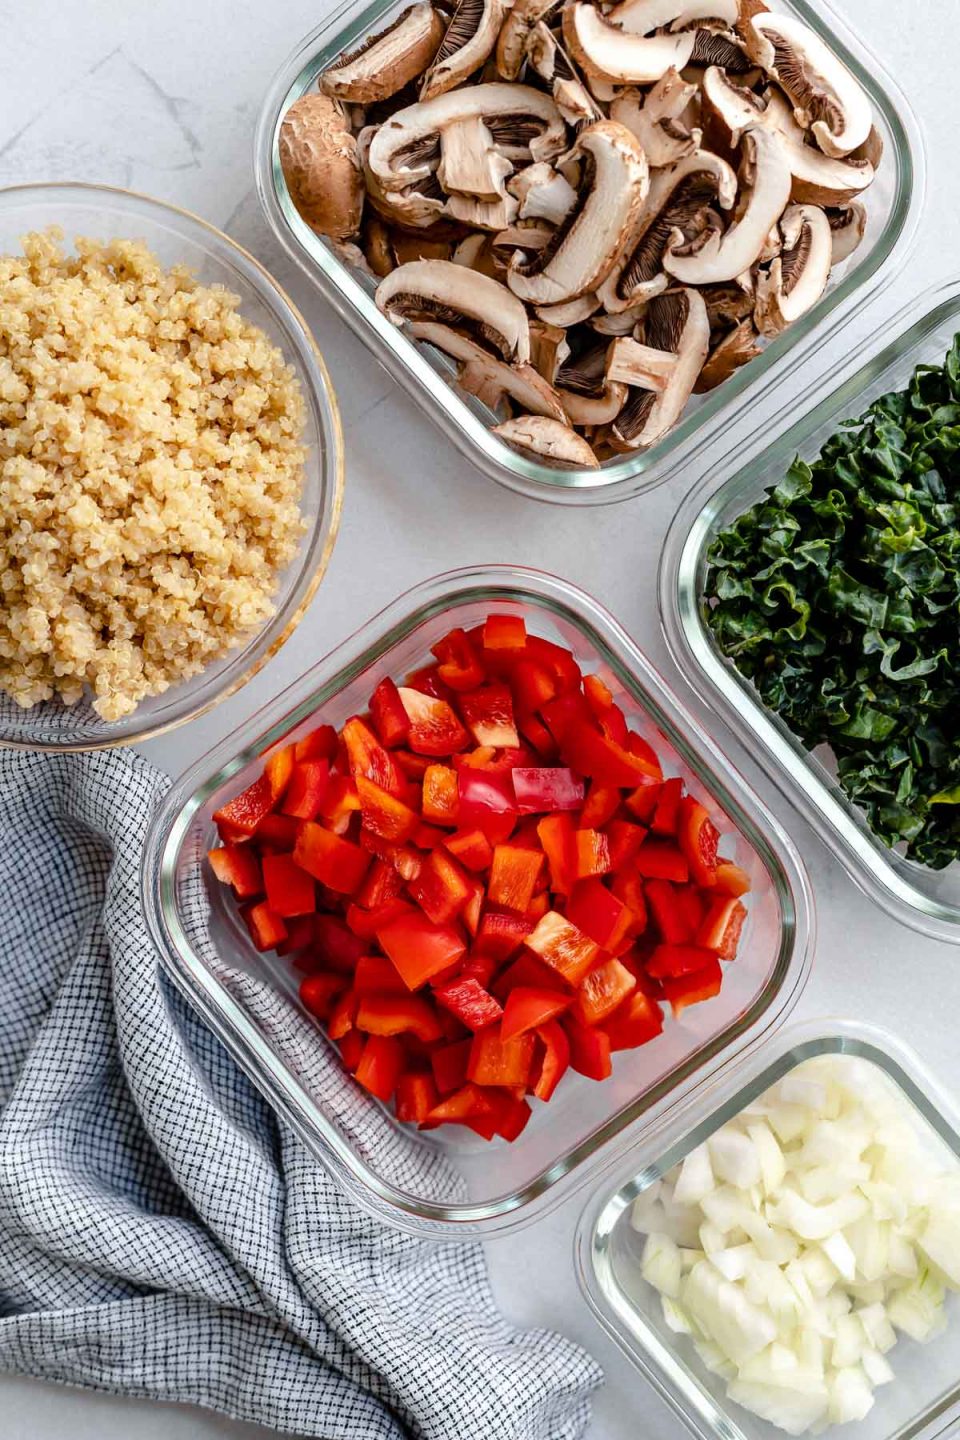 Chicken sausage quinoa skillet ingredients arranged on a creamy white textured surface: varied sizes of glass meal prep containers are filled with cooked quinoa, thinly sliced baby portobello mushrooms, finely shredded. kale, diced red bell pepper, and diced yellow onion. A blue and white plaid linen napkin rests alongside the open meal prep containers.